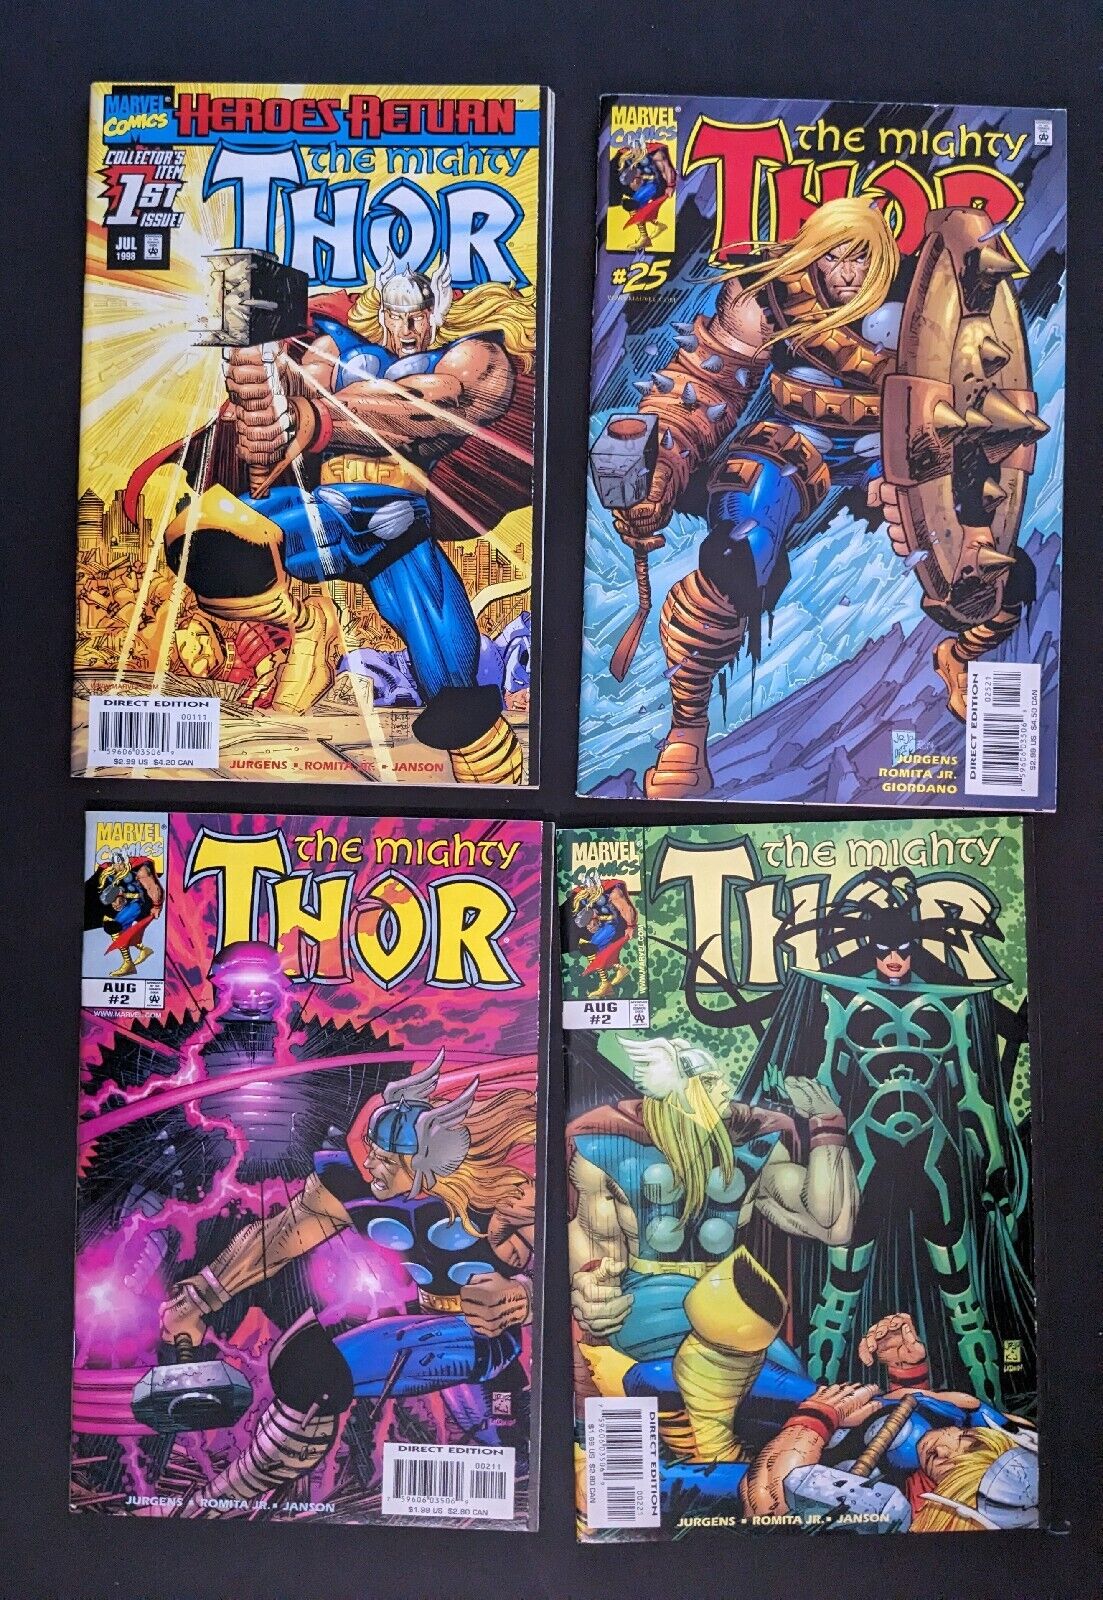 The Mighty Thor Book Lot - Vol. 2 - Incomplete Set - Marvel Comics 